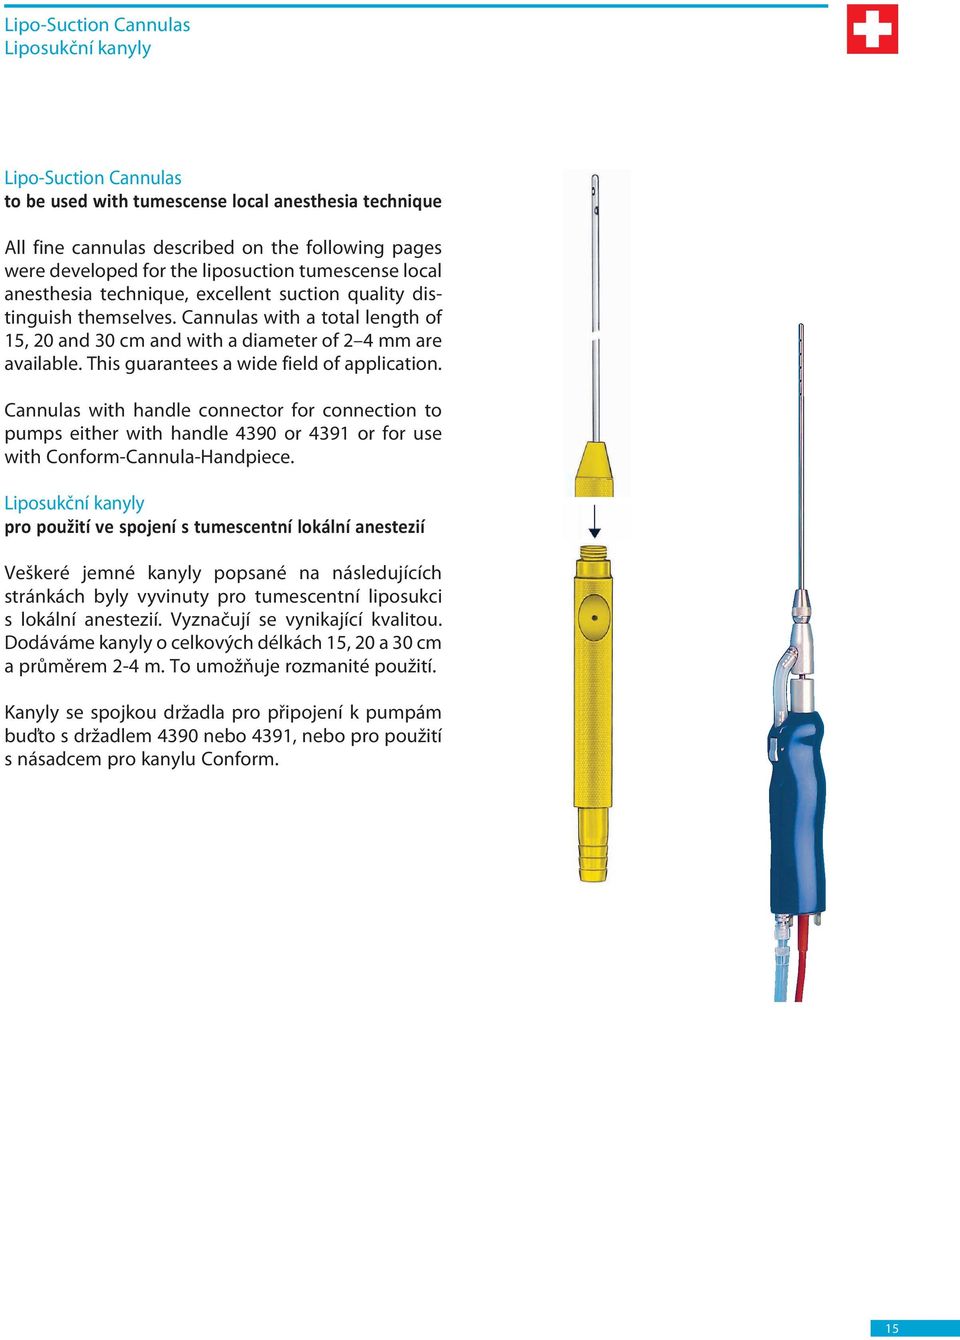 This guarantees a wide field of application. Cannulas with handle connector for connection to pumps either with handle 4390 or 4391 or for use with Conform-Cannula-Handpiece.